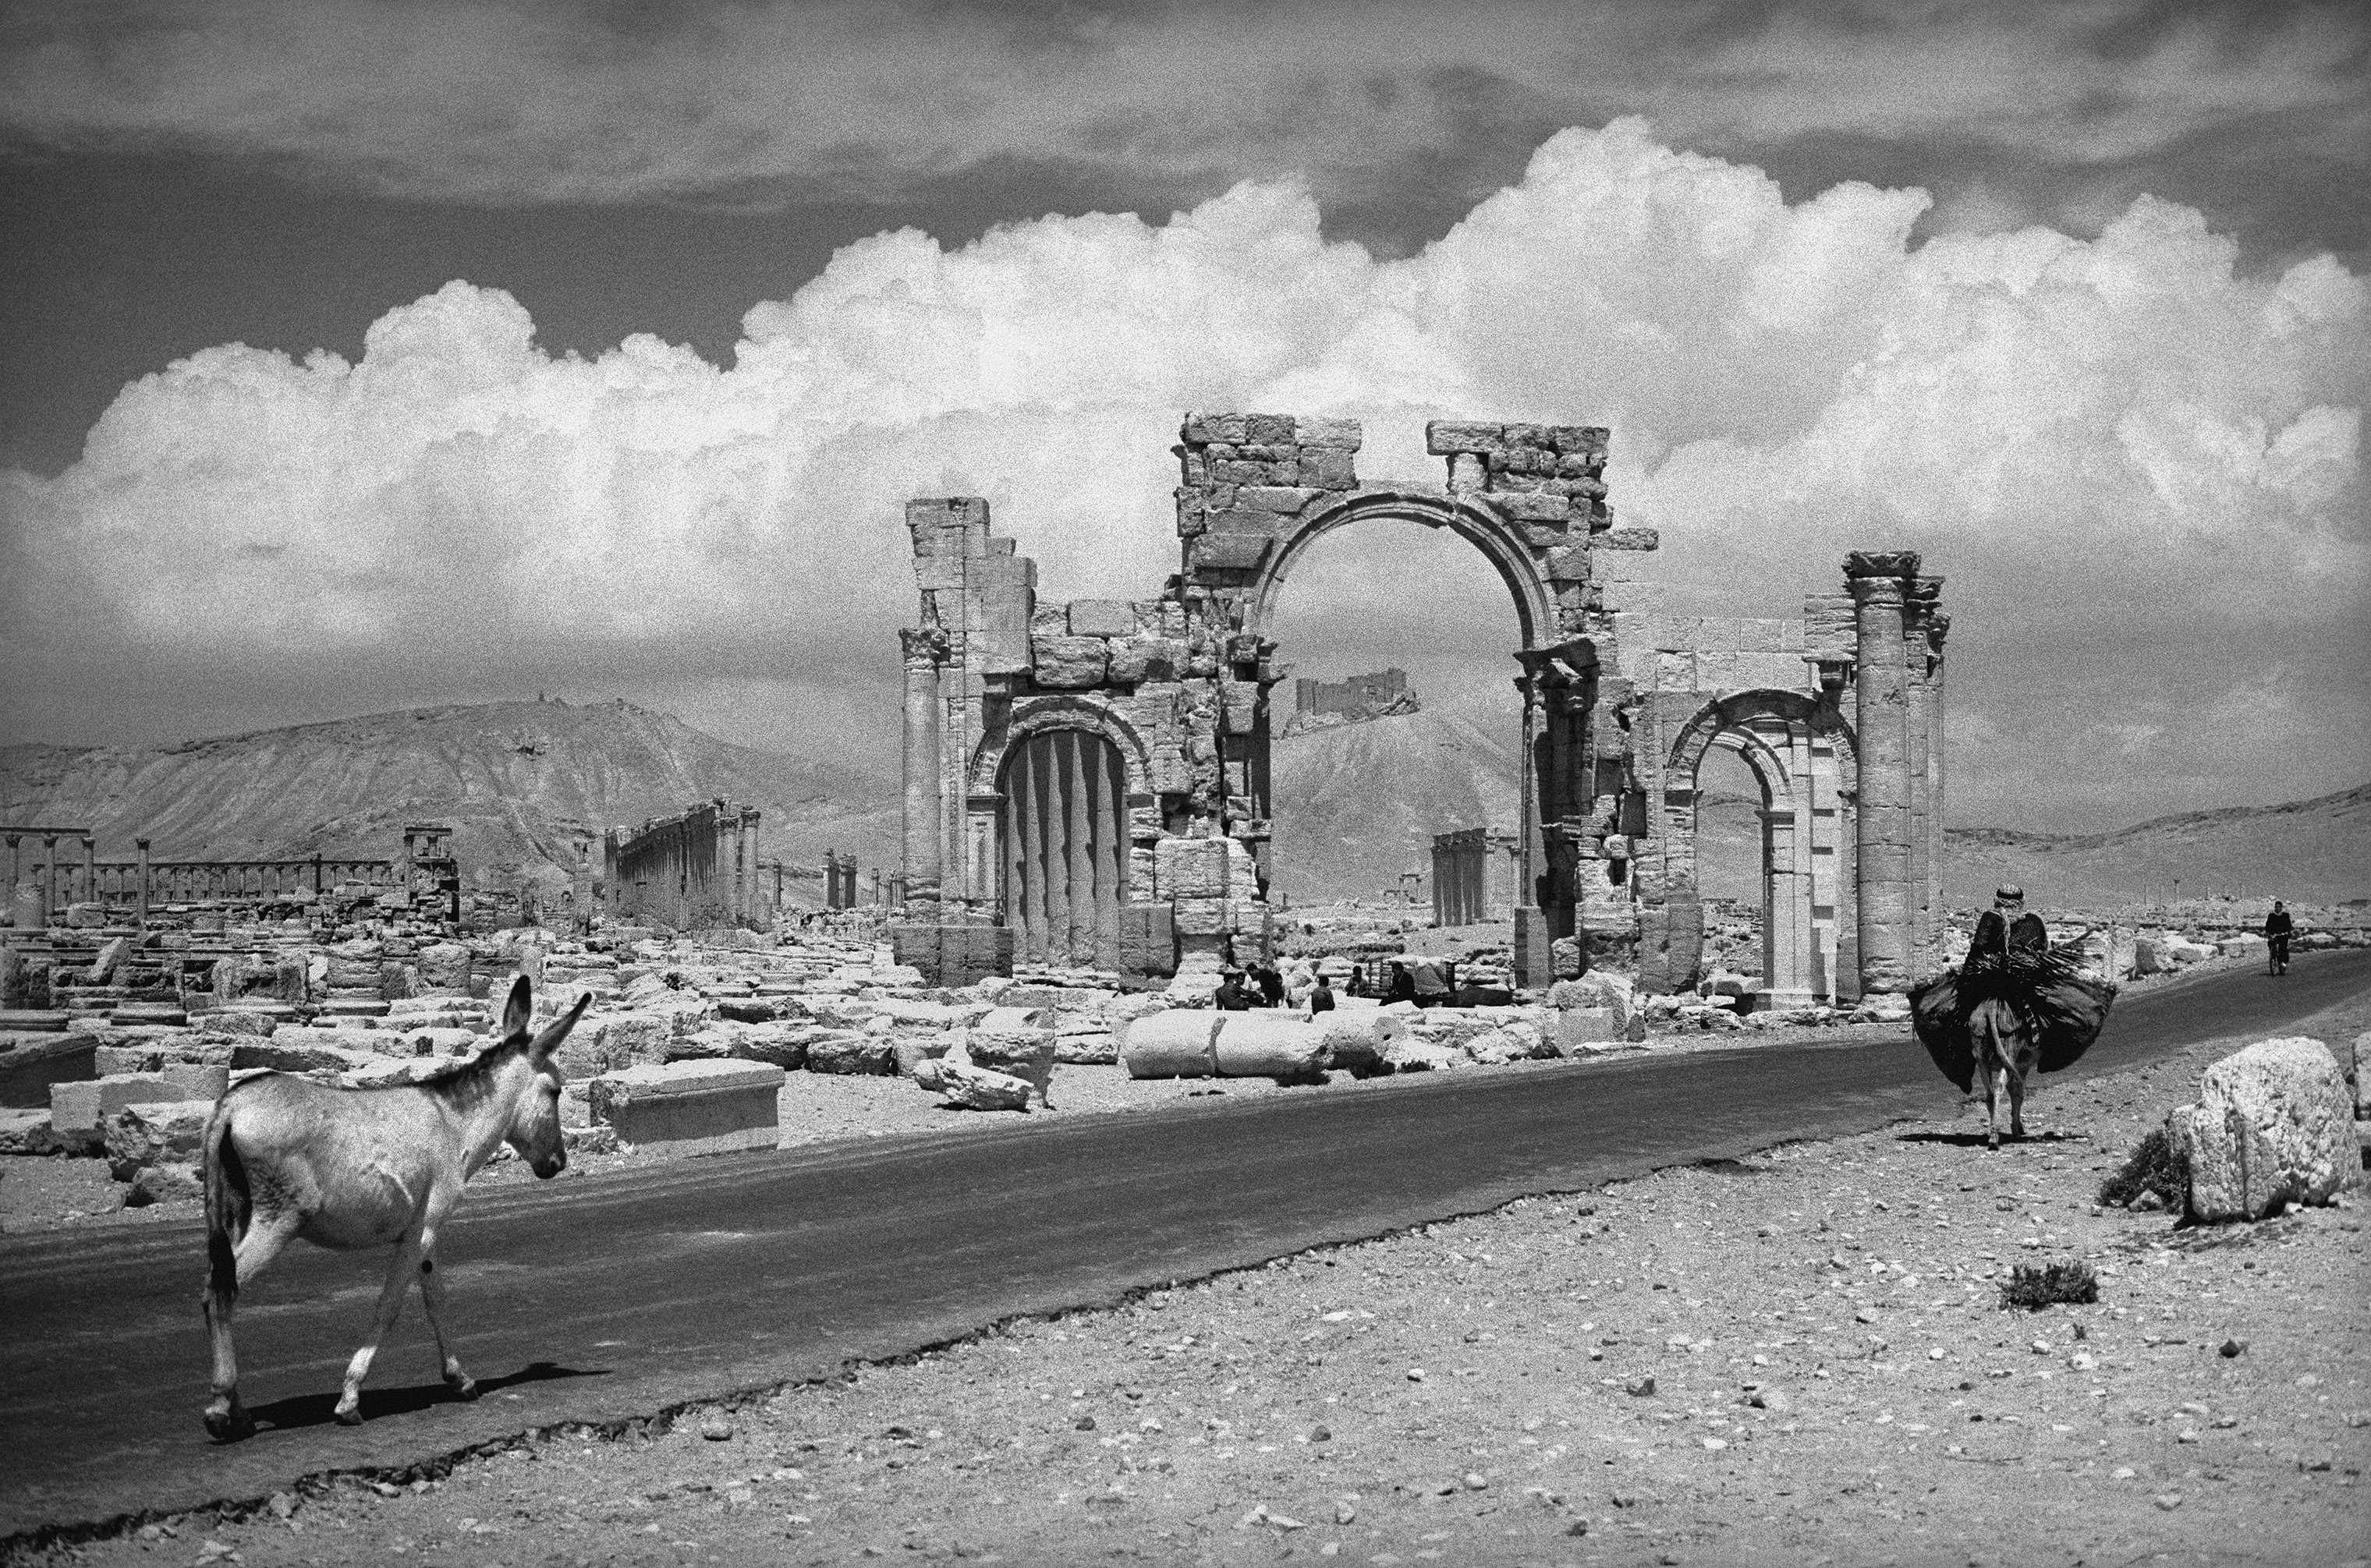 General view of the ruins of Palmyra, Syria. A man on horse back passes as he would have done when Palmyra was originally a trading city in the first century AD. 1966. (George Rodger—Magnum Photos)